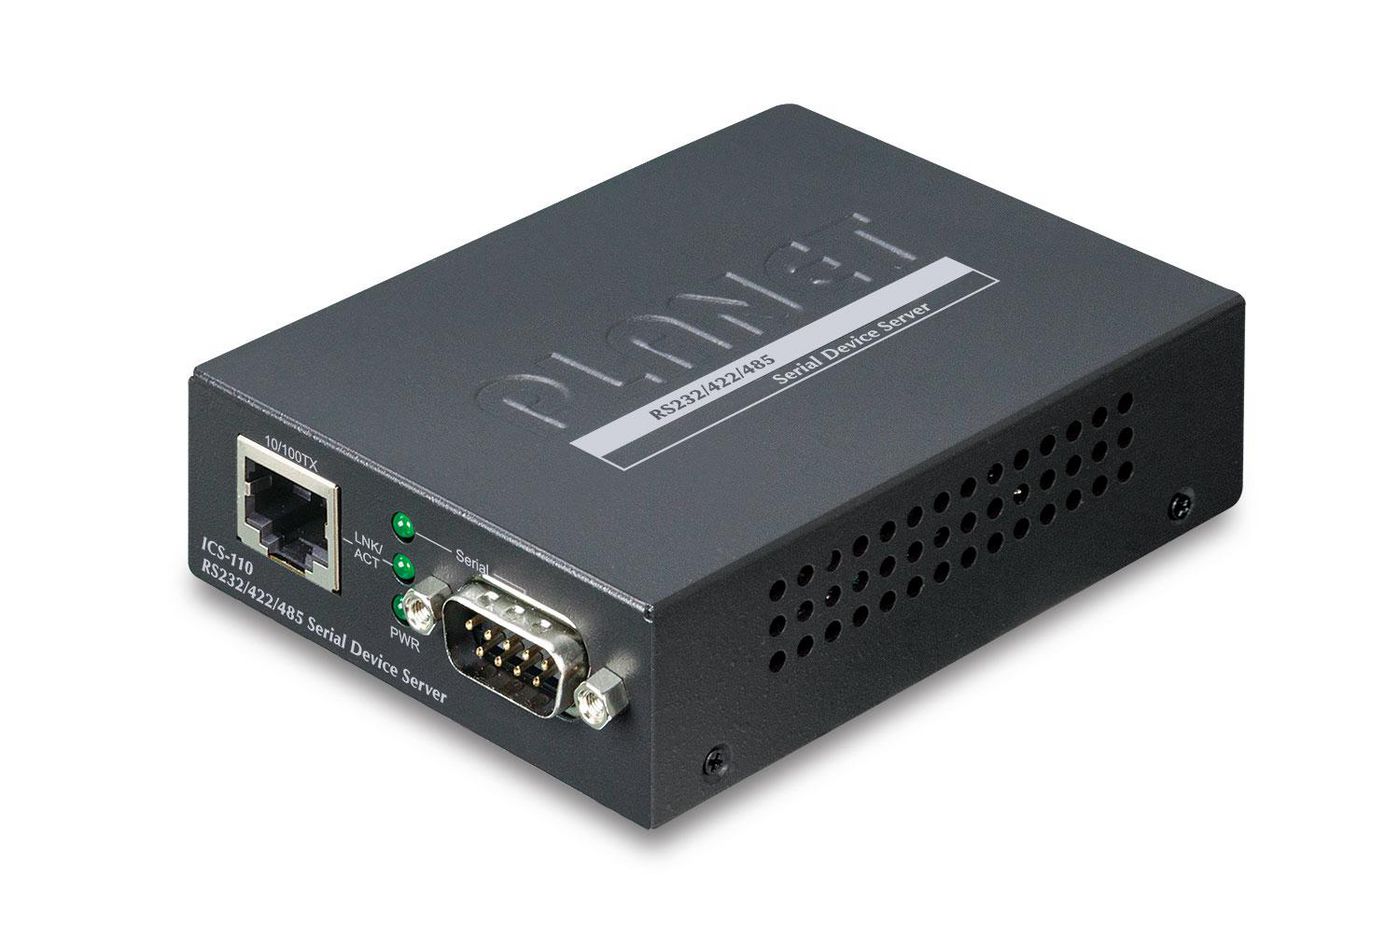 Planet ICS-110 W125648649 RS232RS-422RS485 to Ethernet 